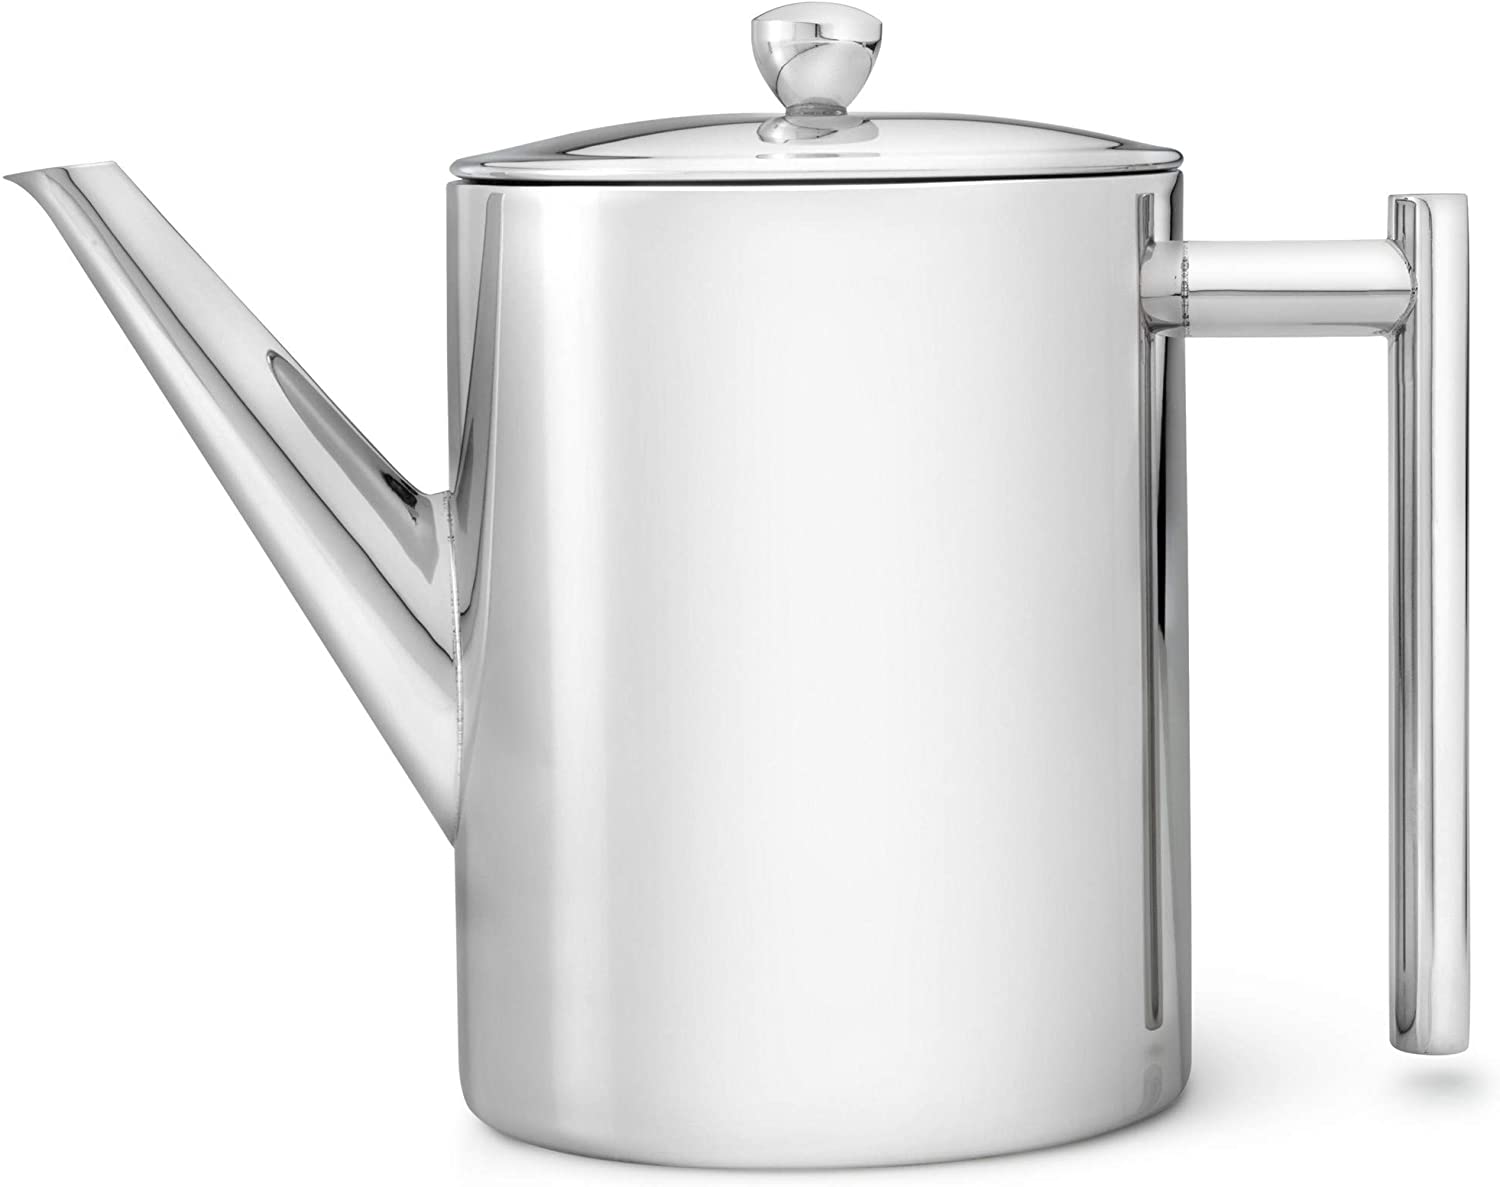 Bredemeijer 1.2 L Shiny Stainless Steel Teapot Cylindre, Silver